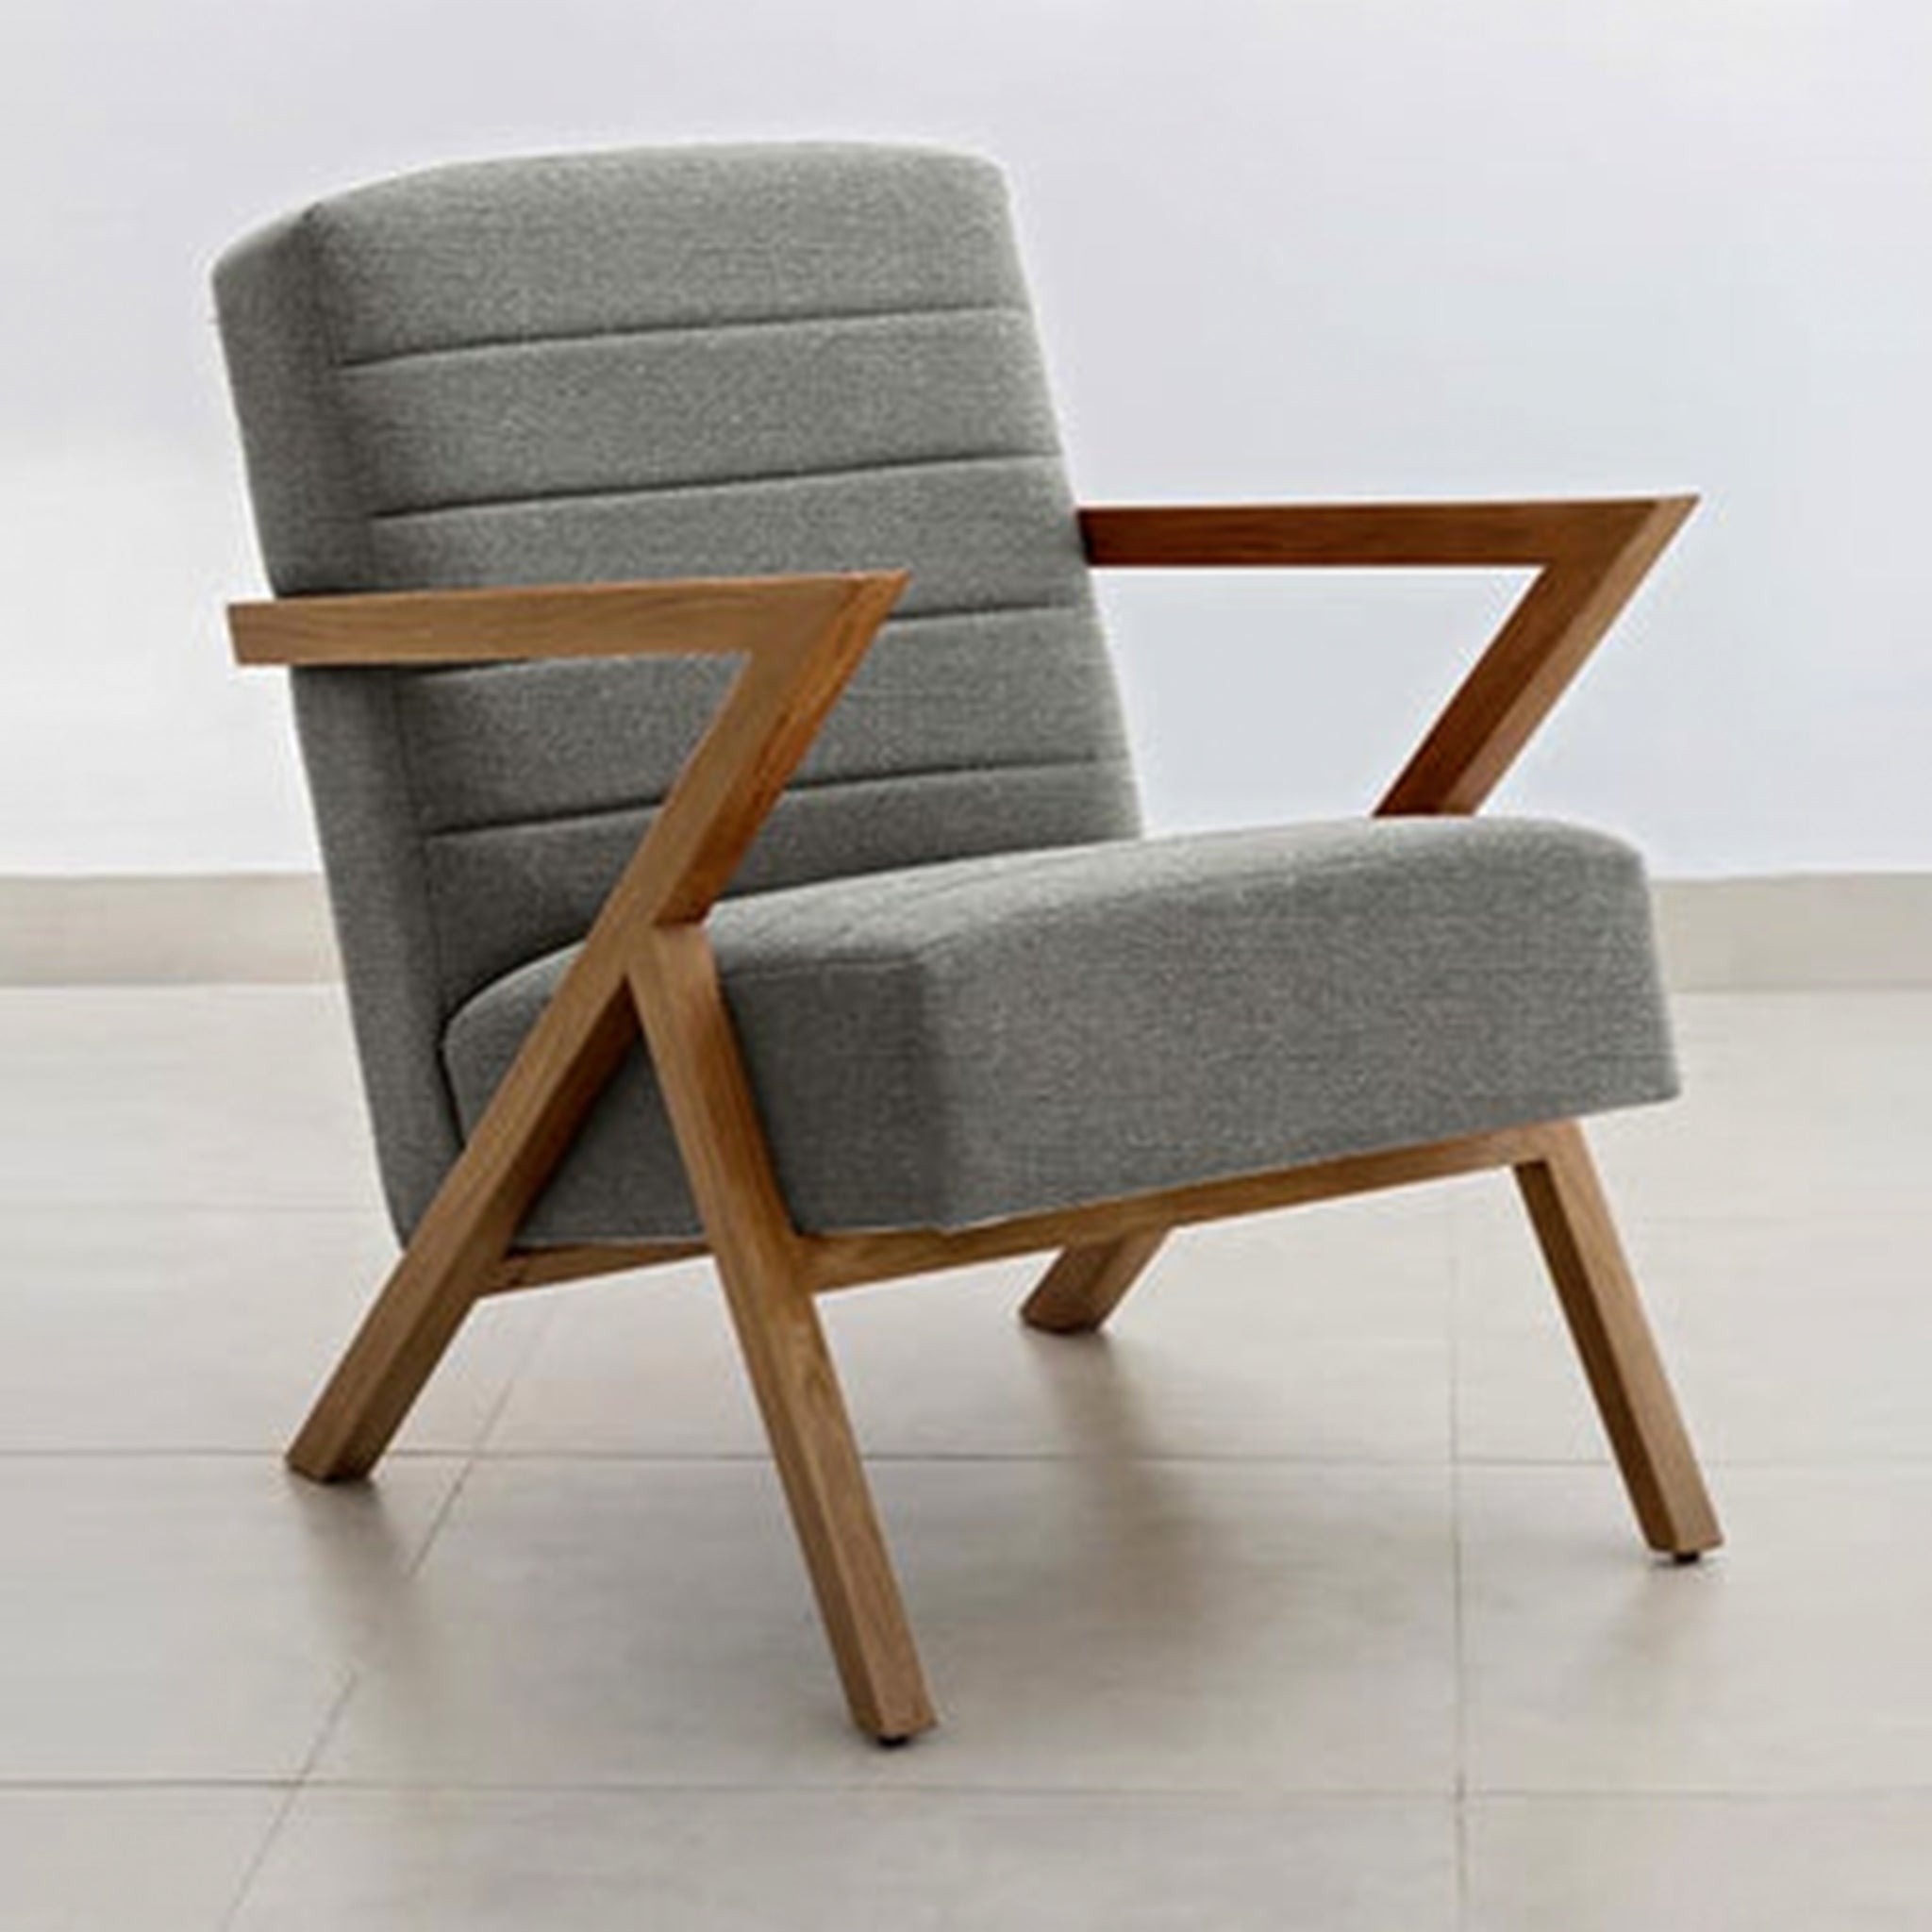 Stylish Stanley chair with a modern mid-century feel